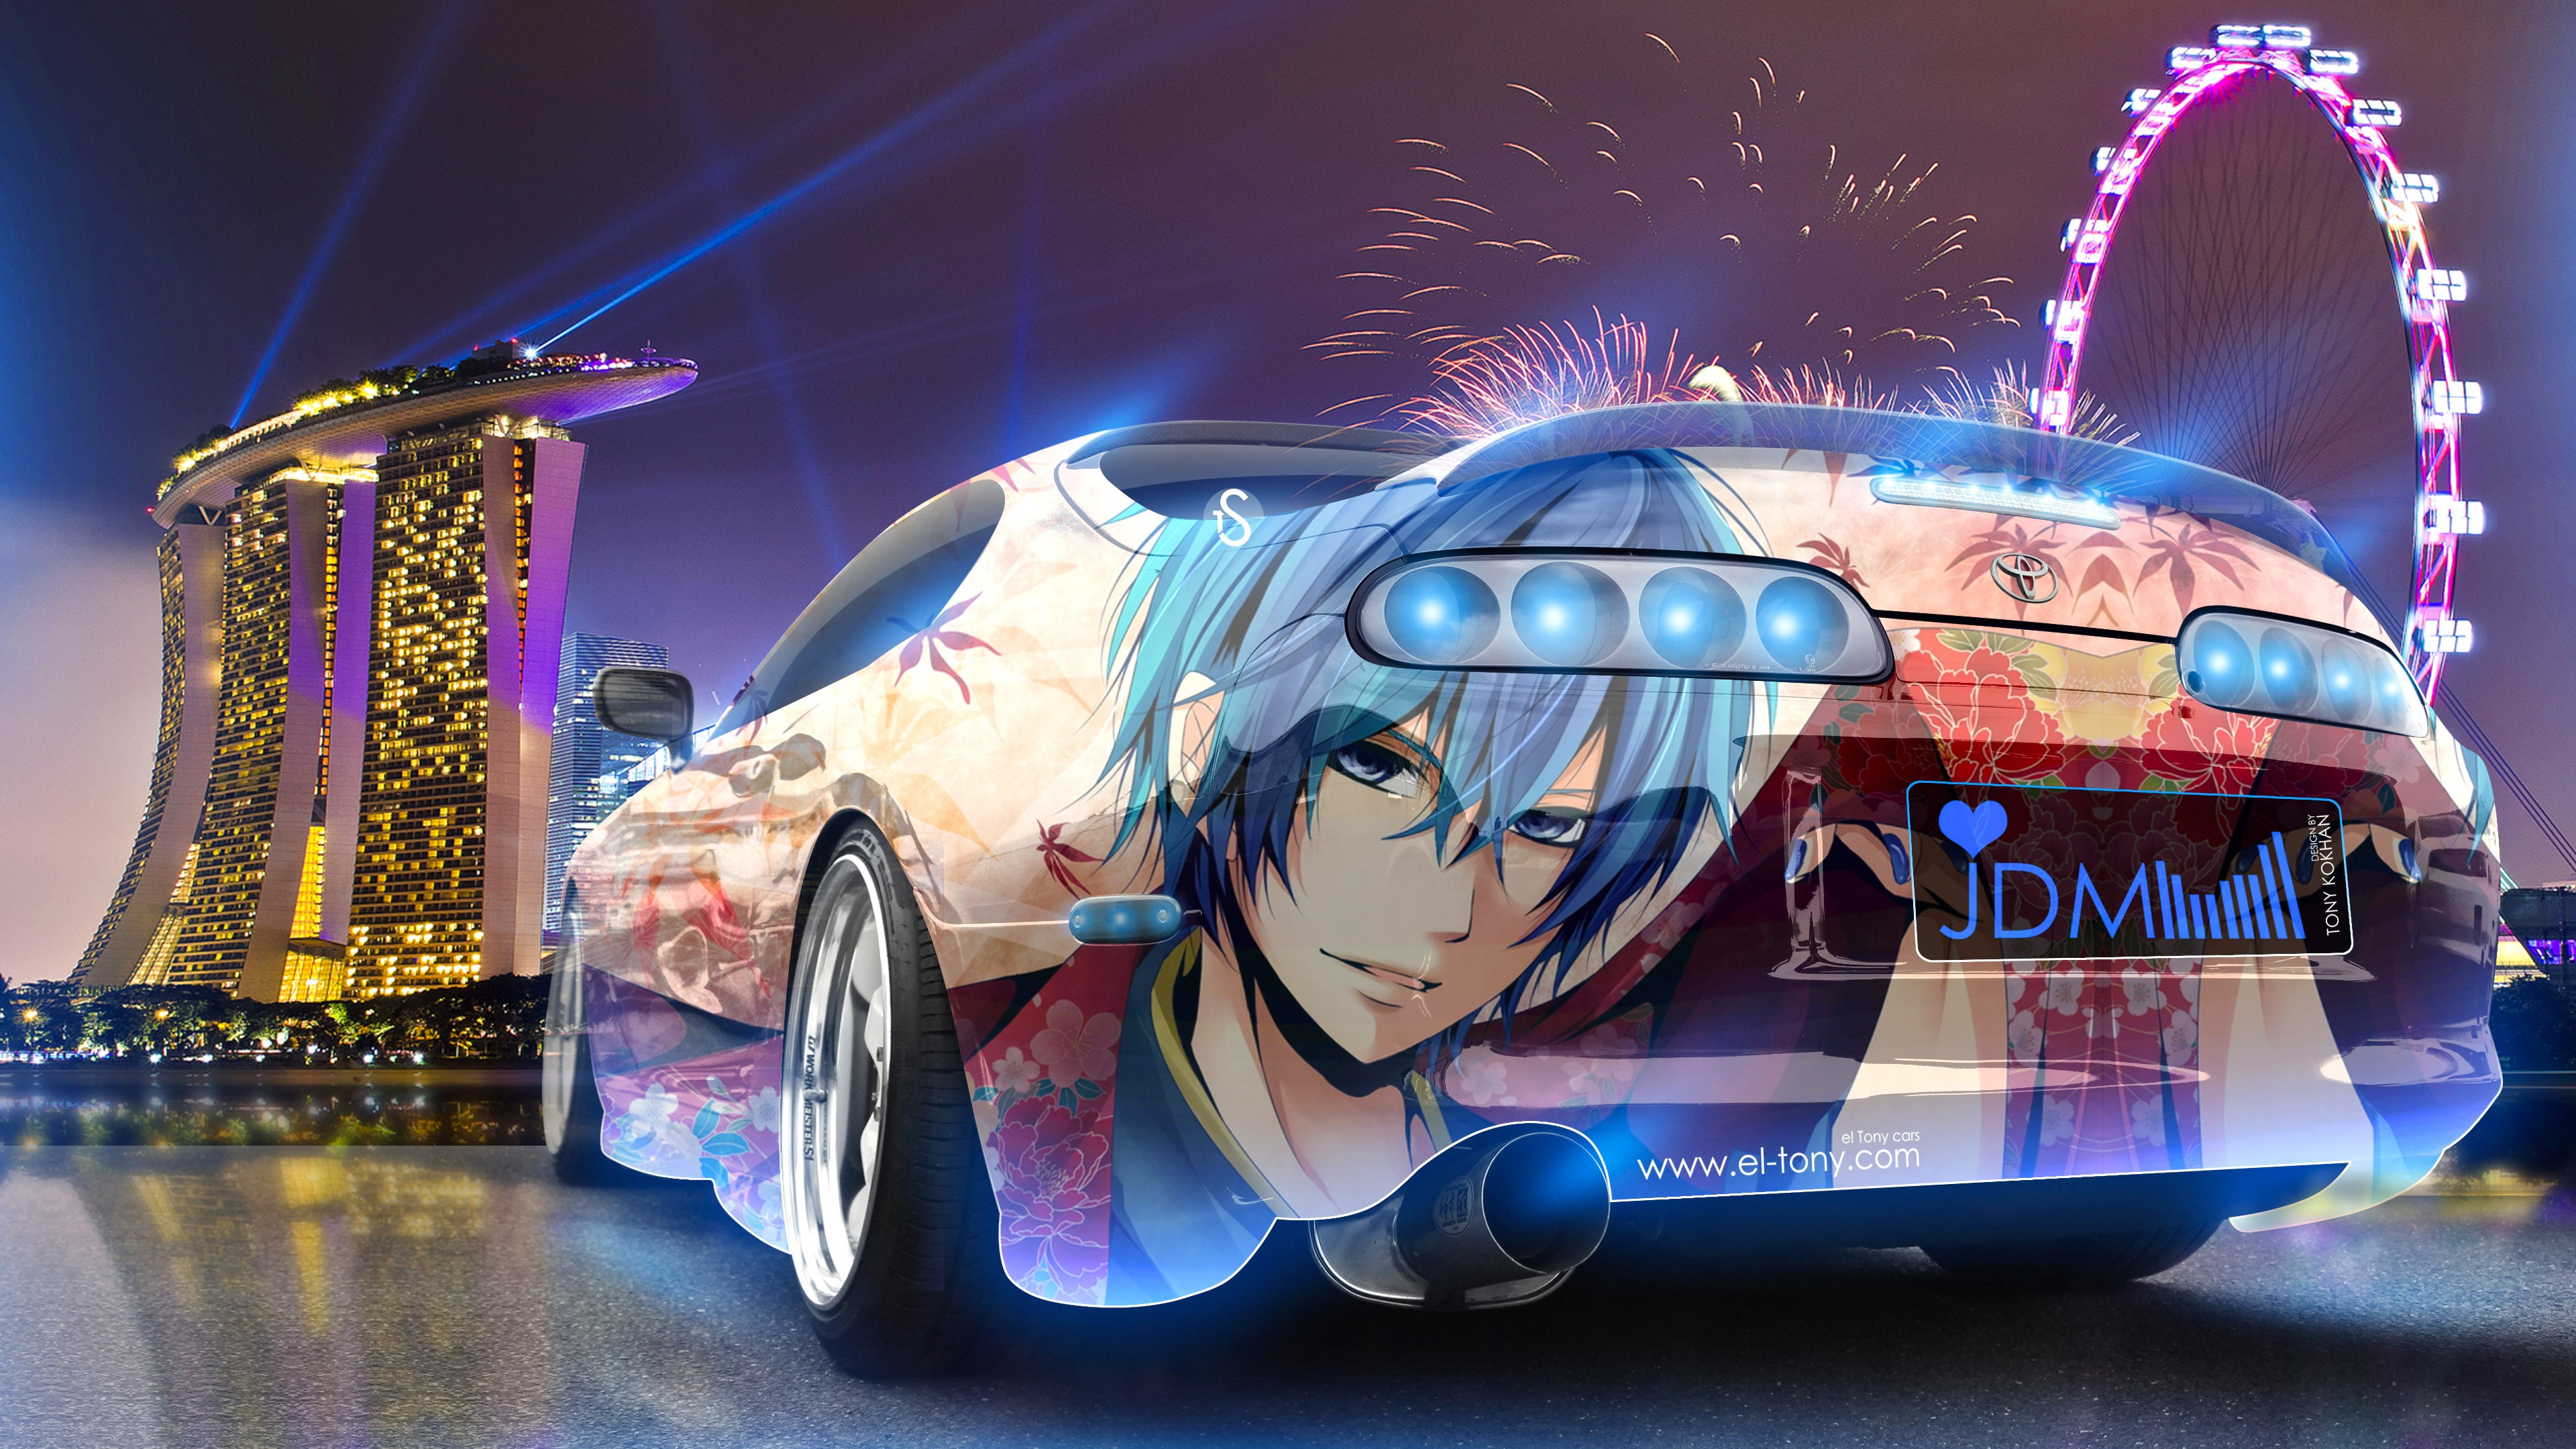 Anime Car Wallpapers and Backgrounds image Free Download